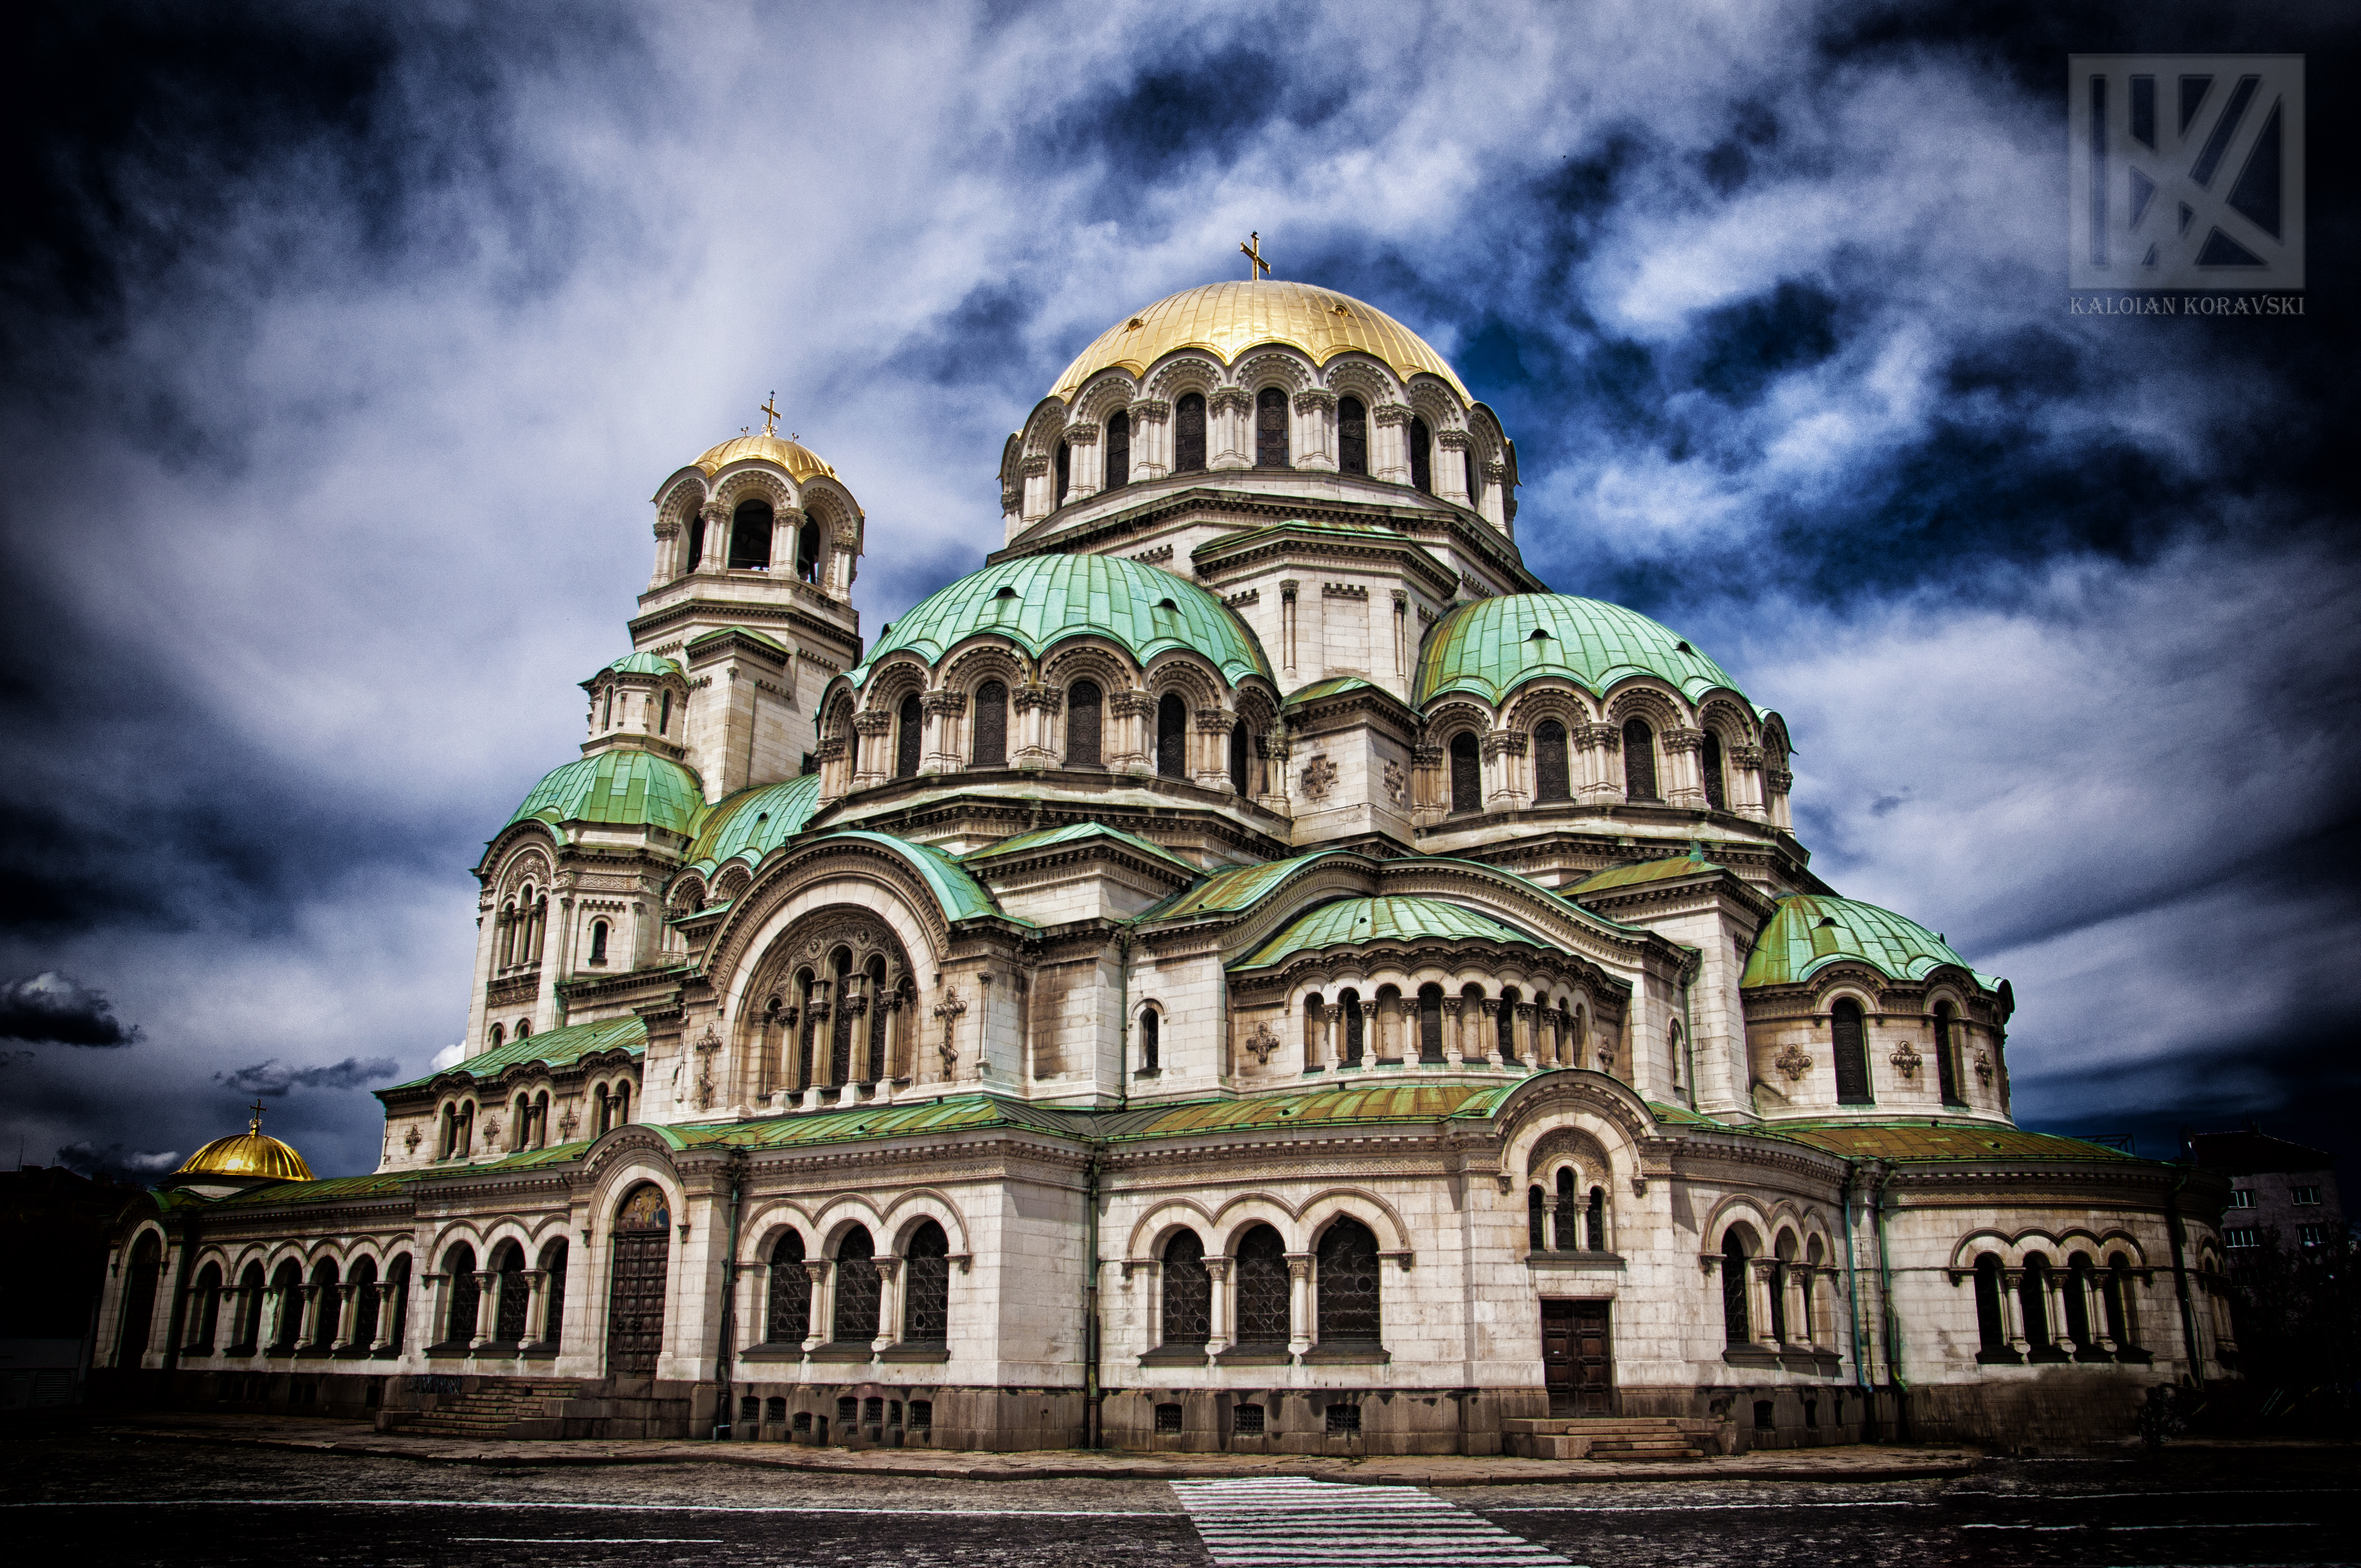 Amazing Alexander Nevsky Cathedral, Sofia Pictures & Backgrounds